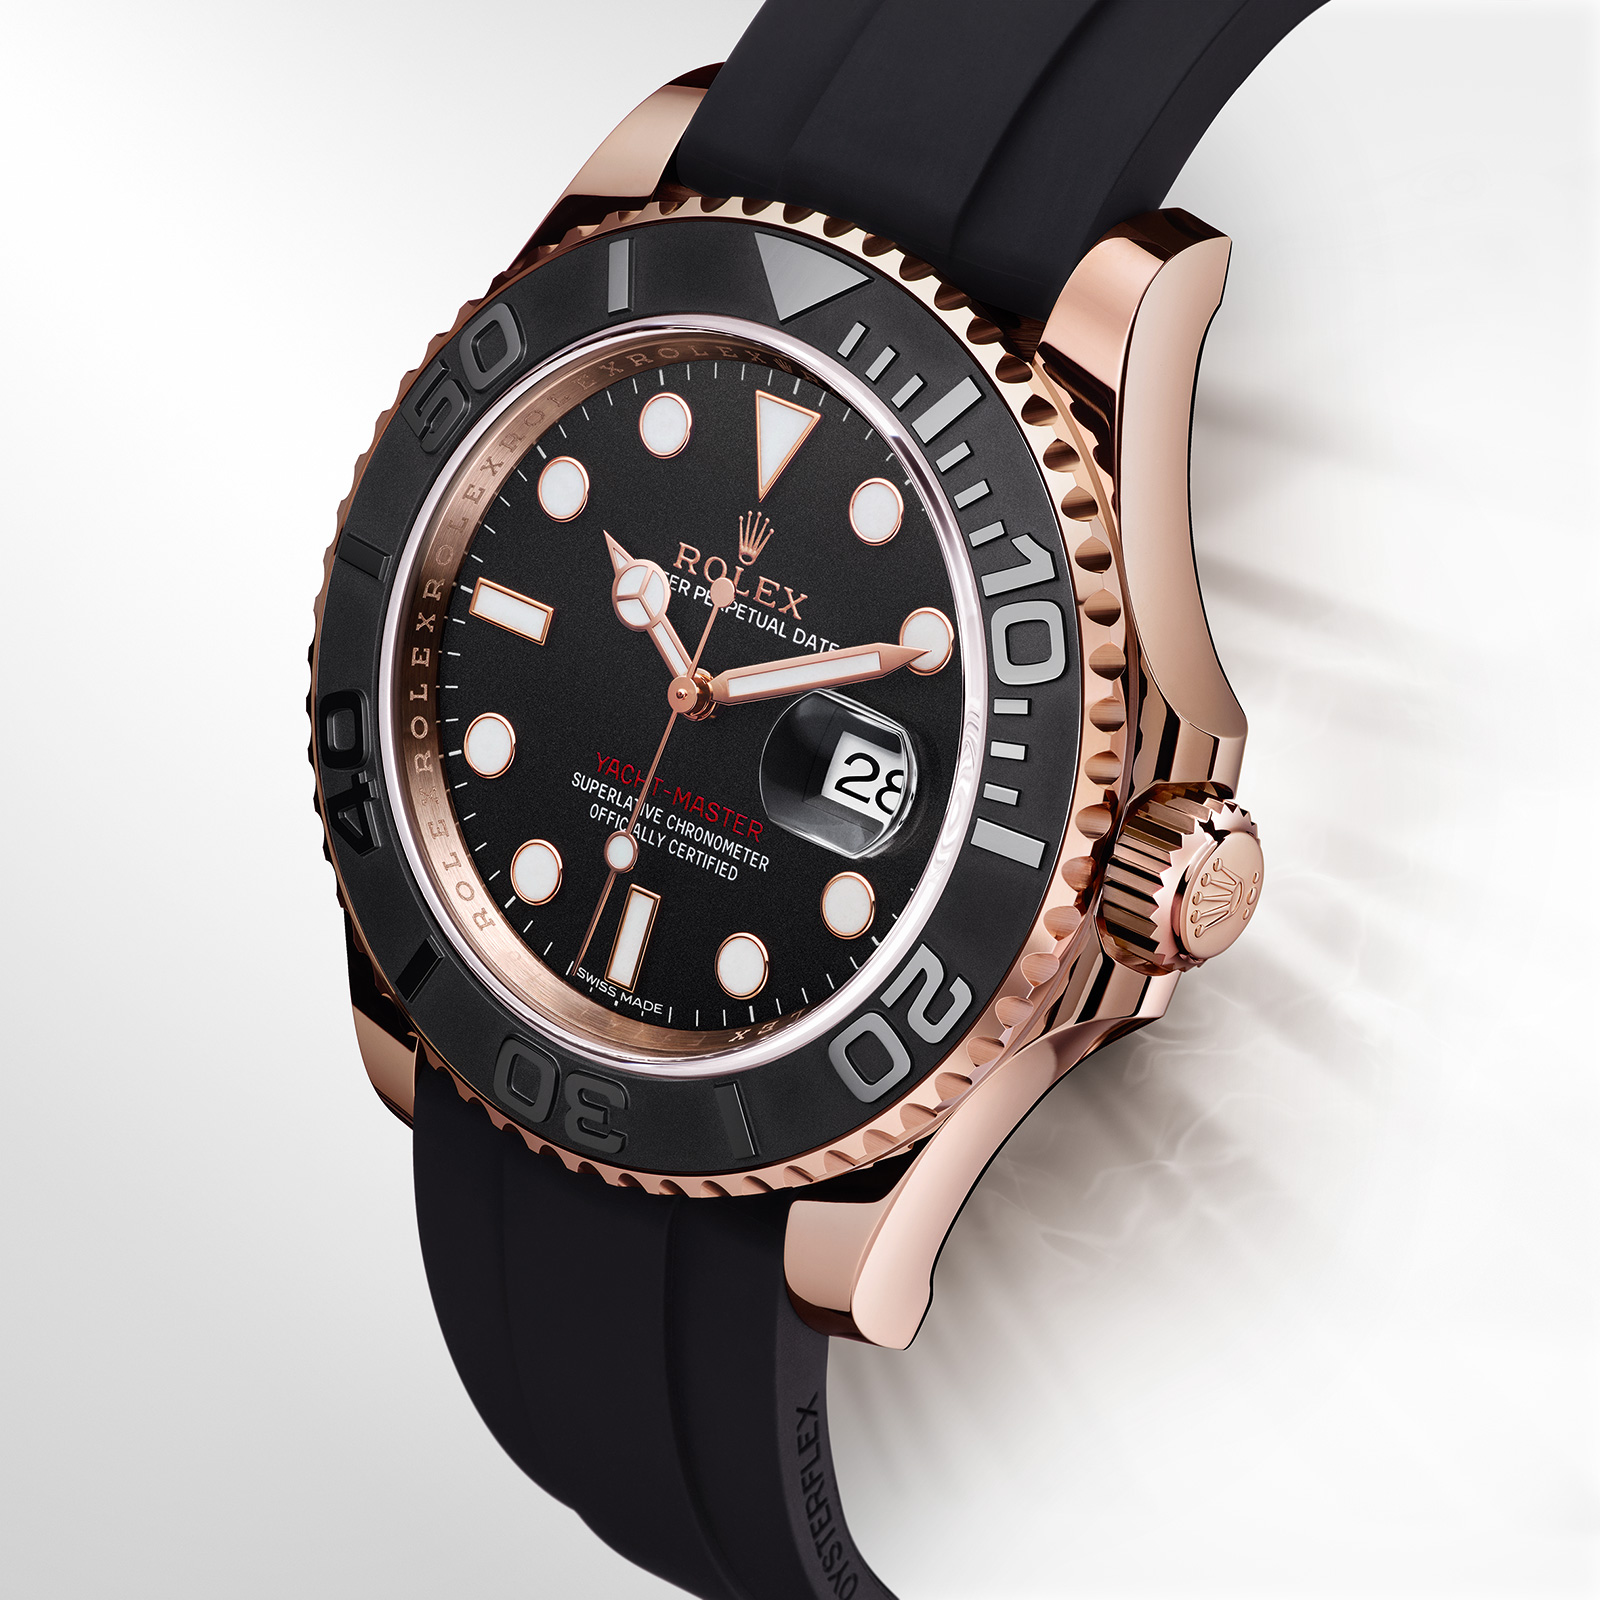 yacht master rubber strap price